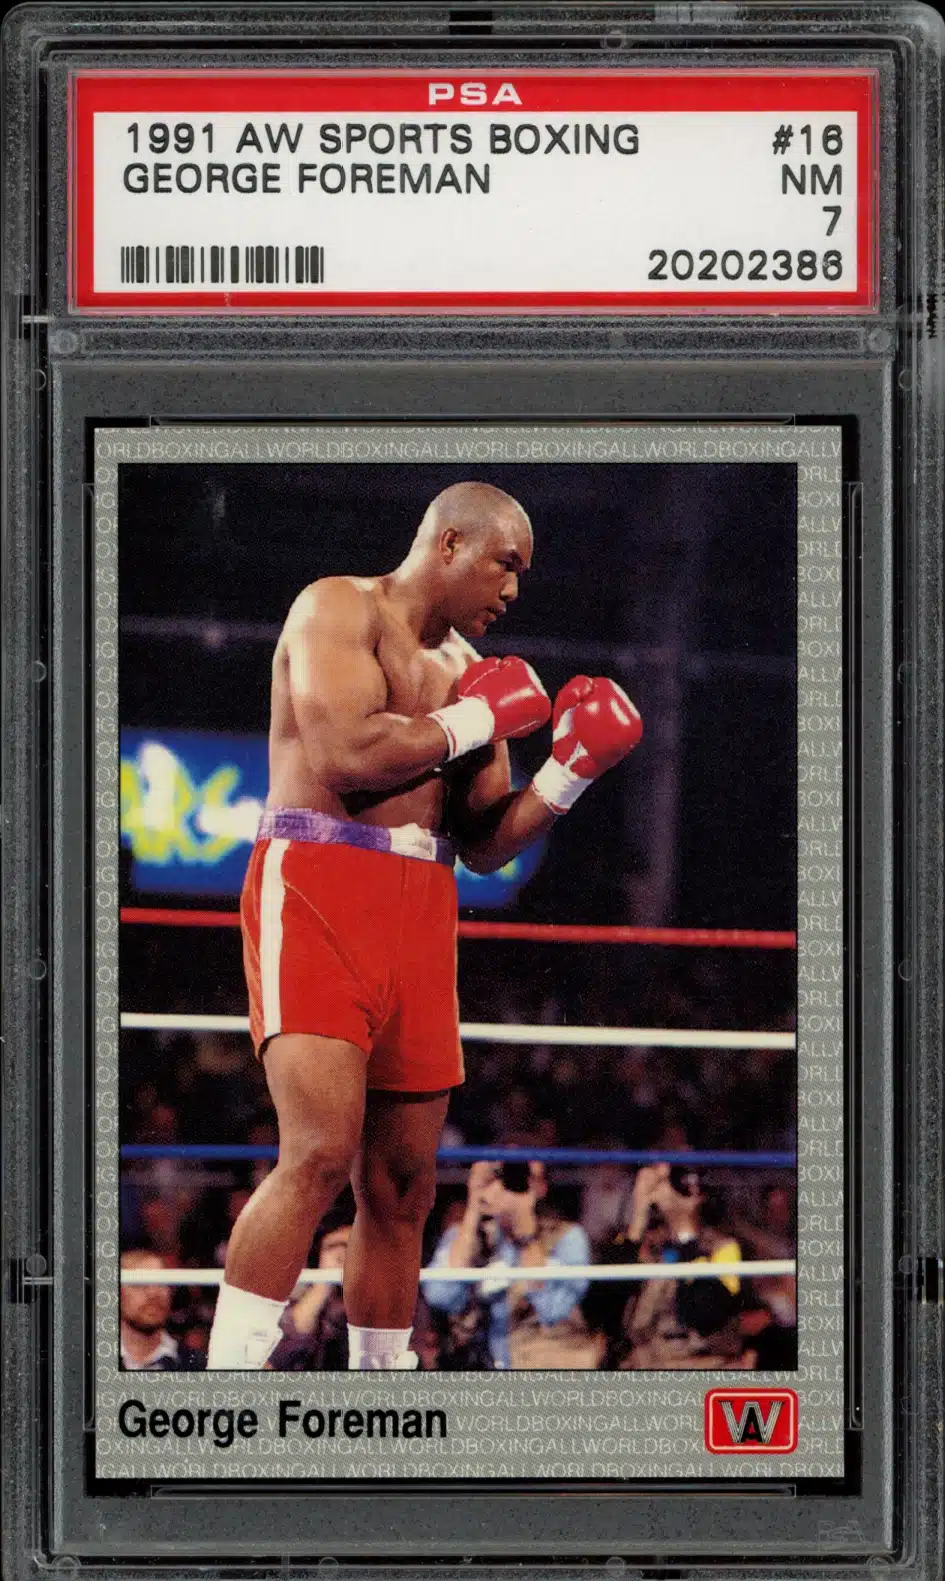 1991 AW Sports Boxing George Foreman #16 (PSA 7) (Front)